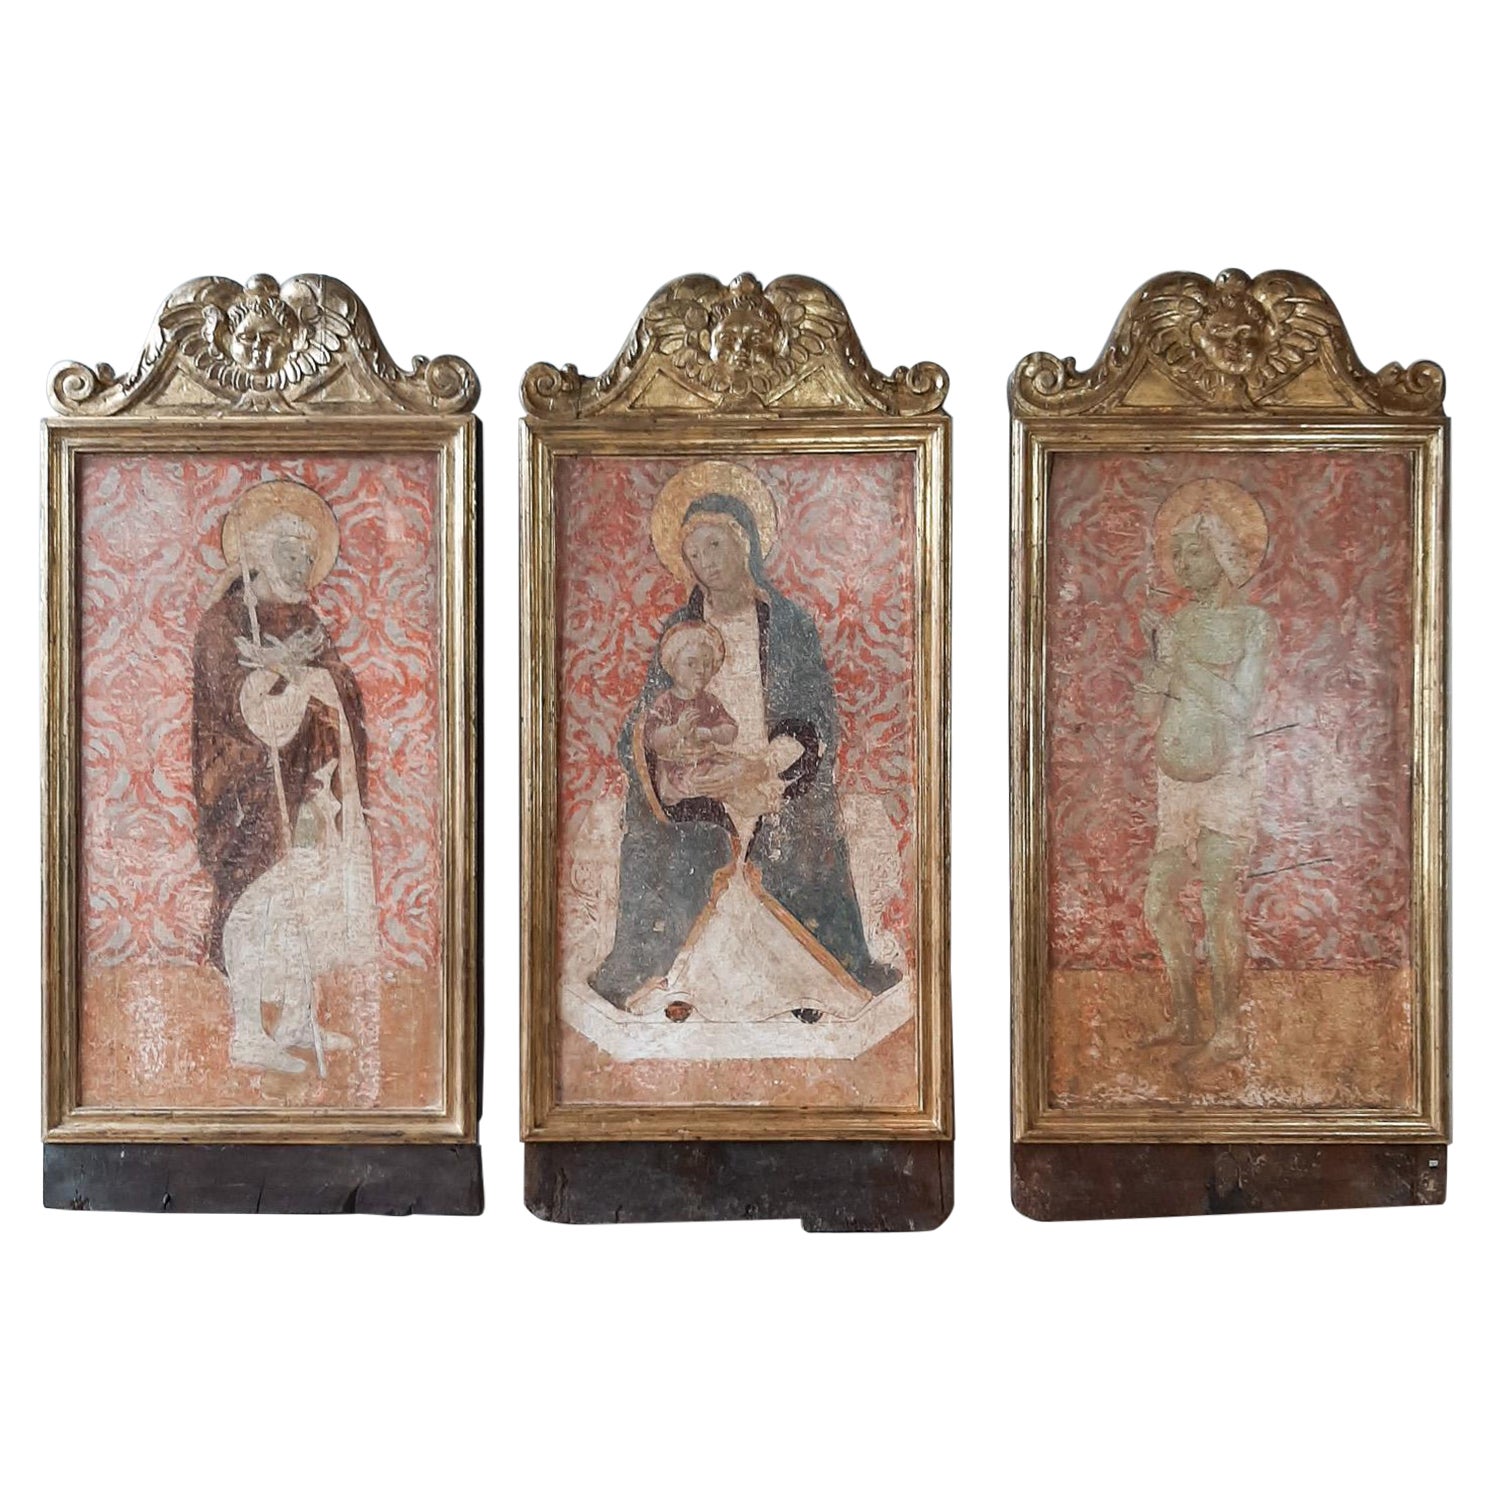 Triptych with Fresco on Walnut from the 14th to 15th Century, Siena, Italy  For Sale at 1stDibs